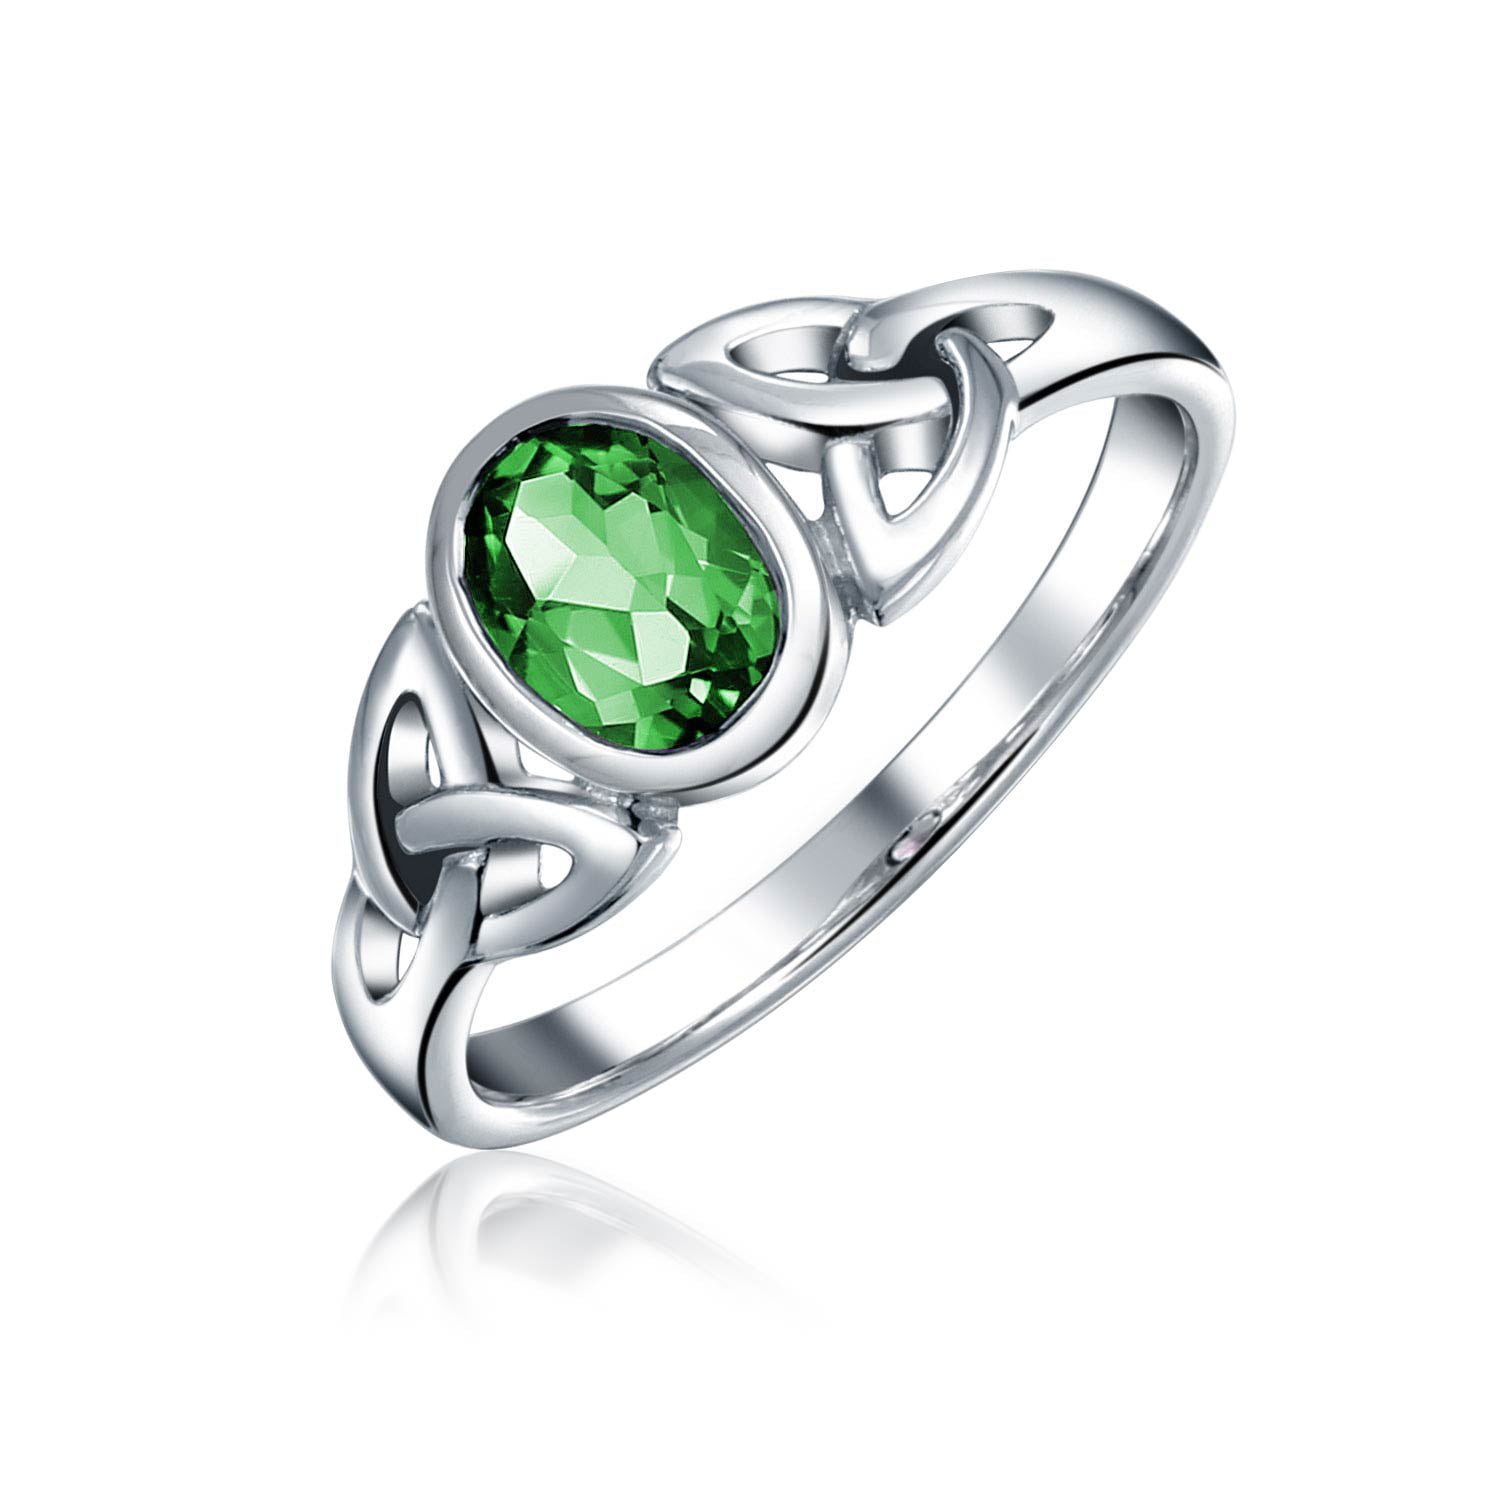 Sterling Silver Claddagh Ring With Simulated Emerald And Triquetras 